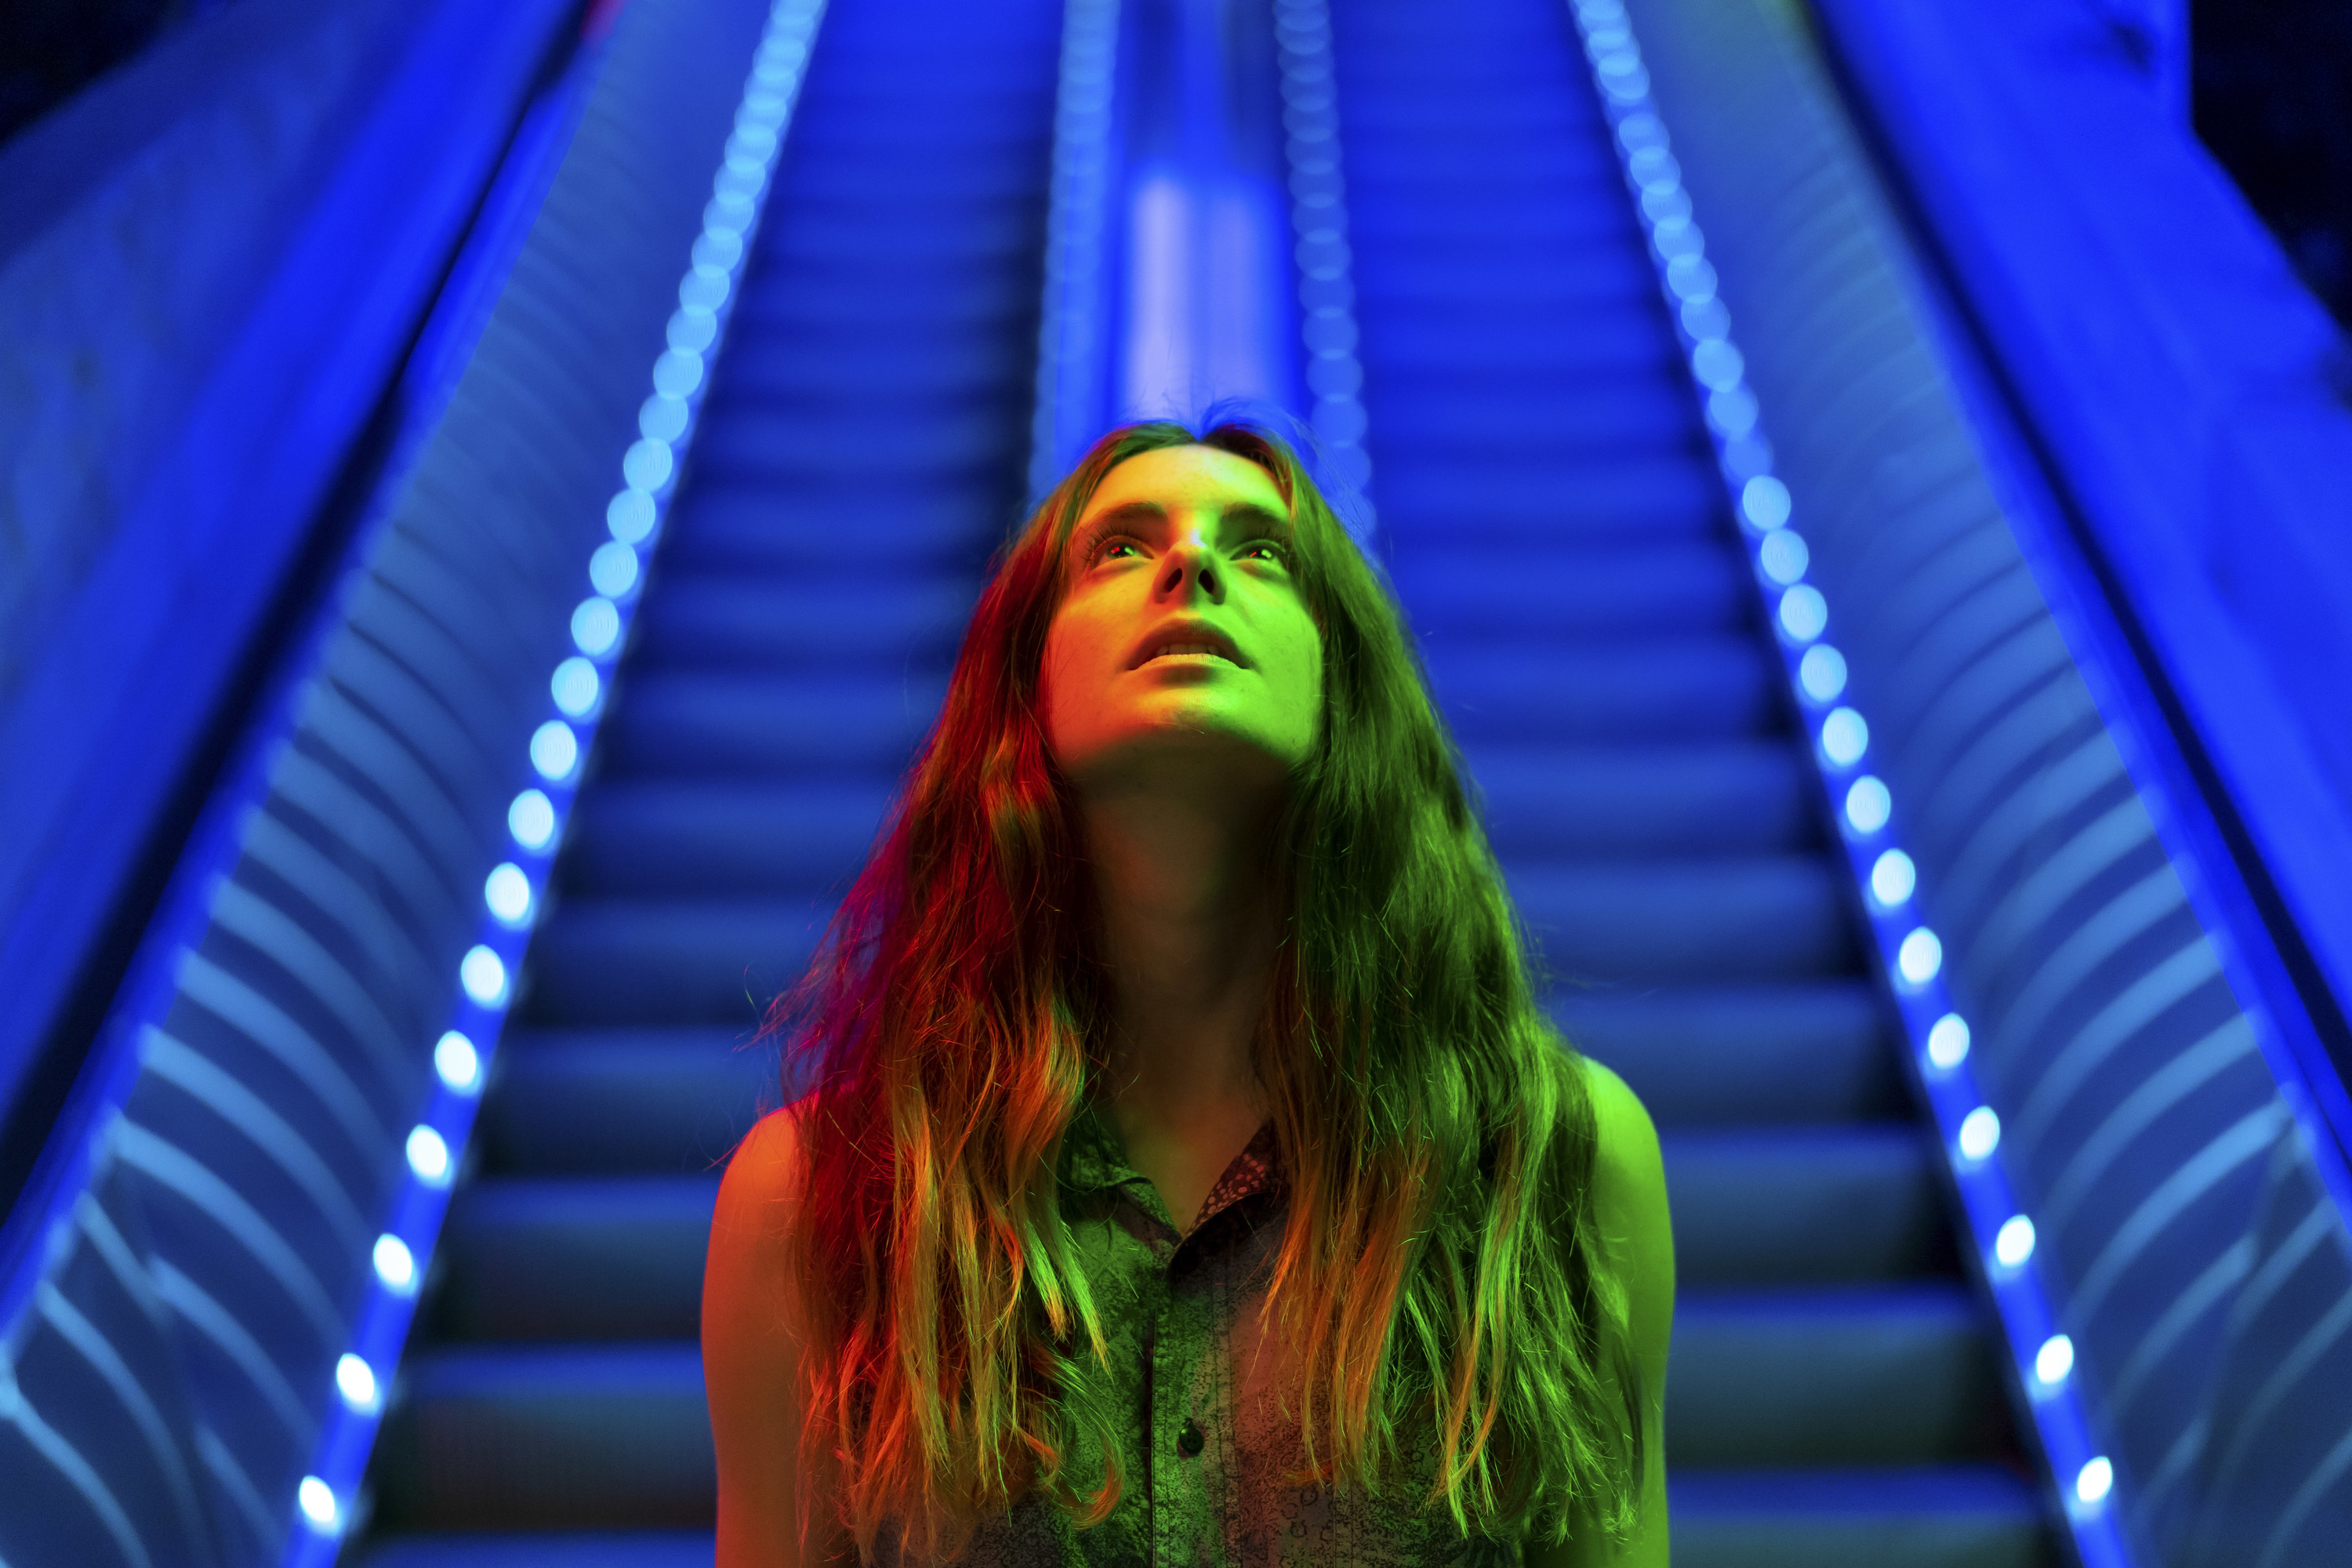 A woman looks up at a colorful image emitting green and red light